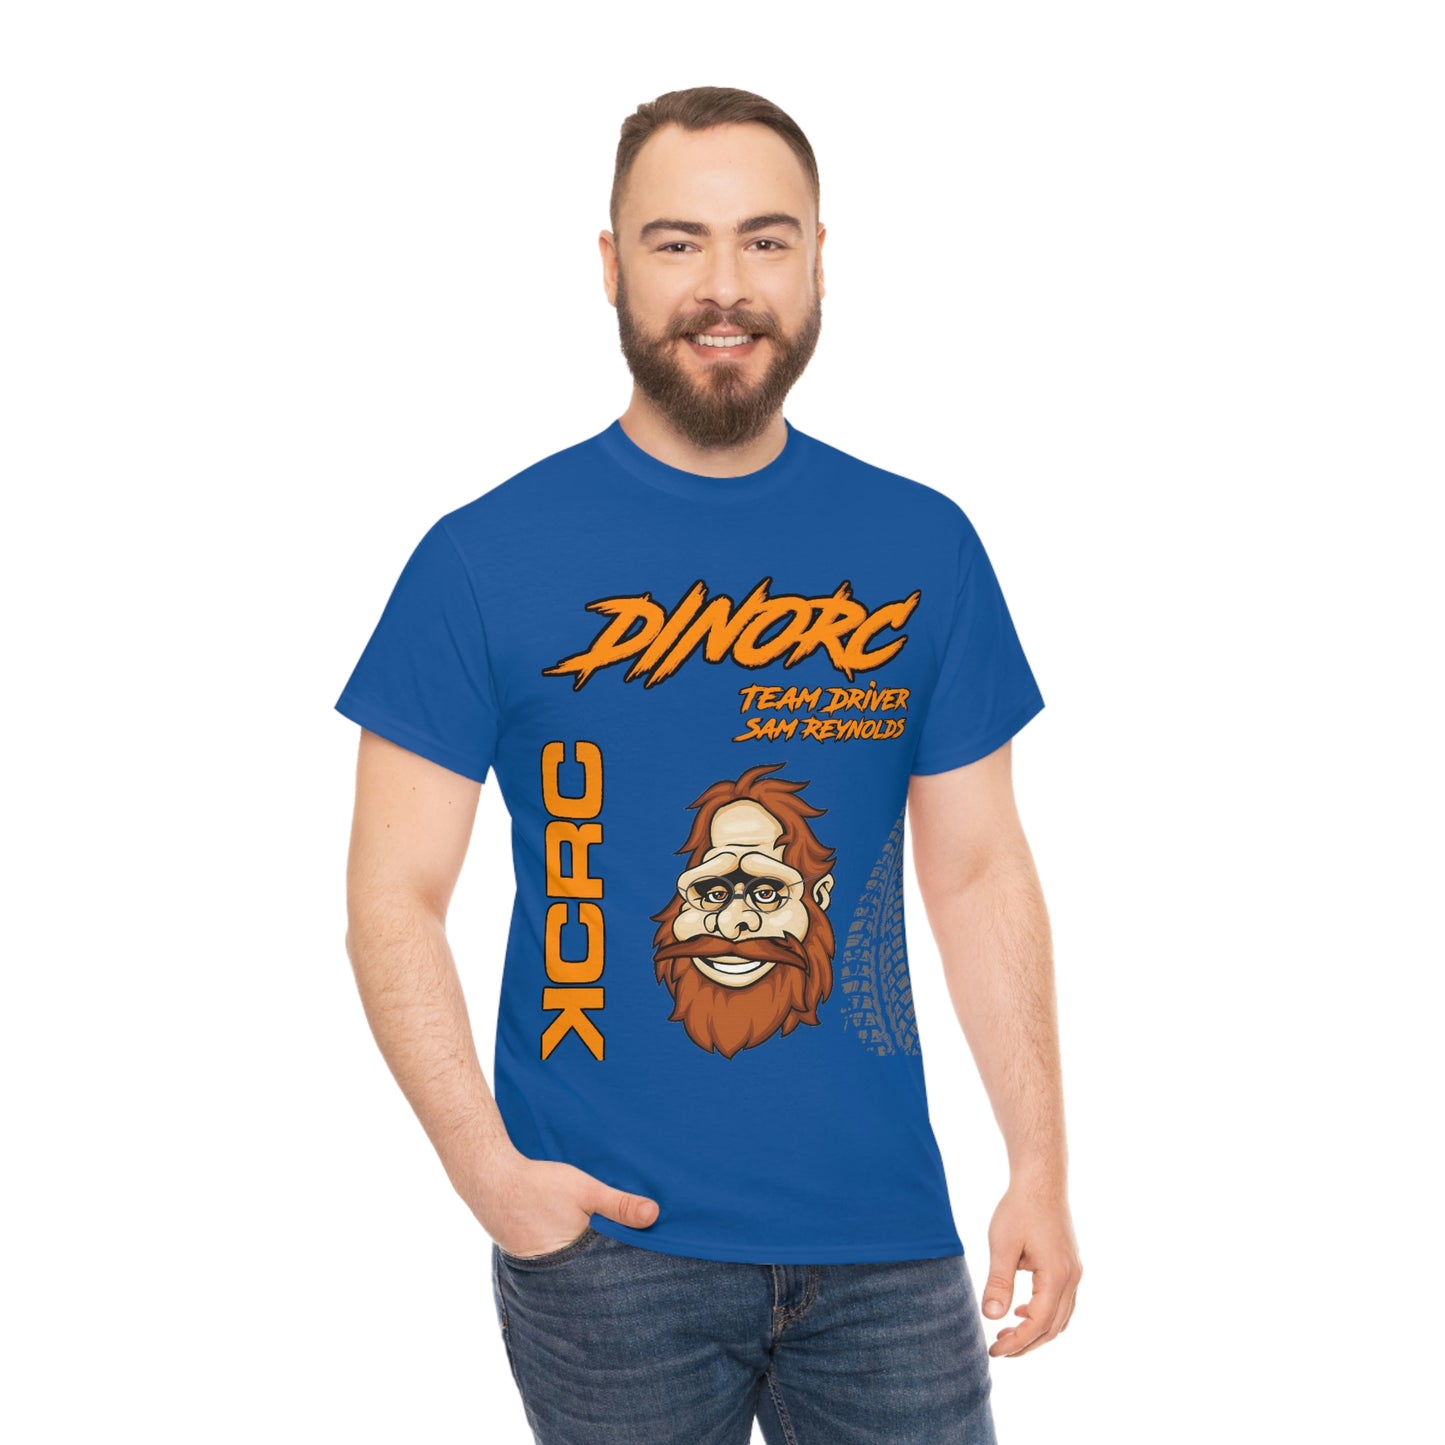 Team Driver Sam Reynolds Front and Back DinoRc Logo T-Shirt S-5x 5 colors